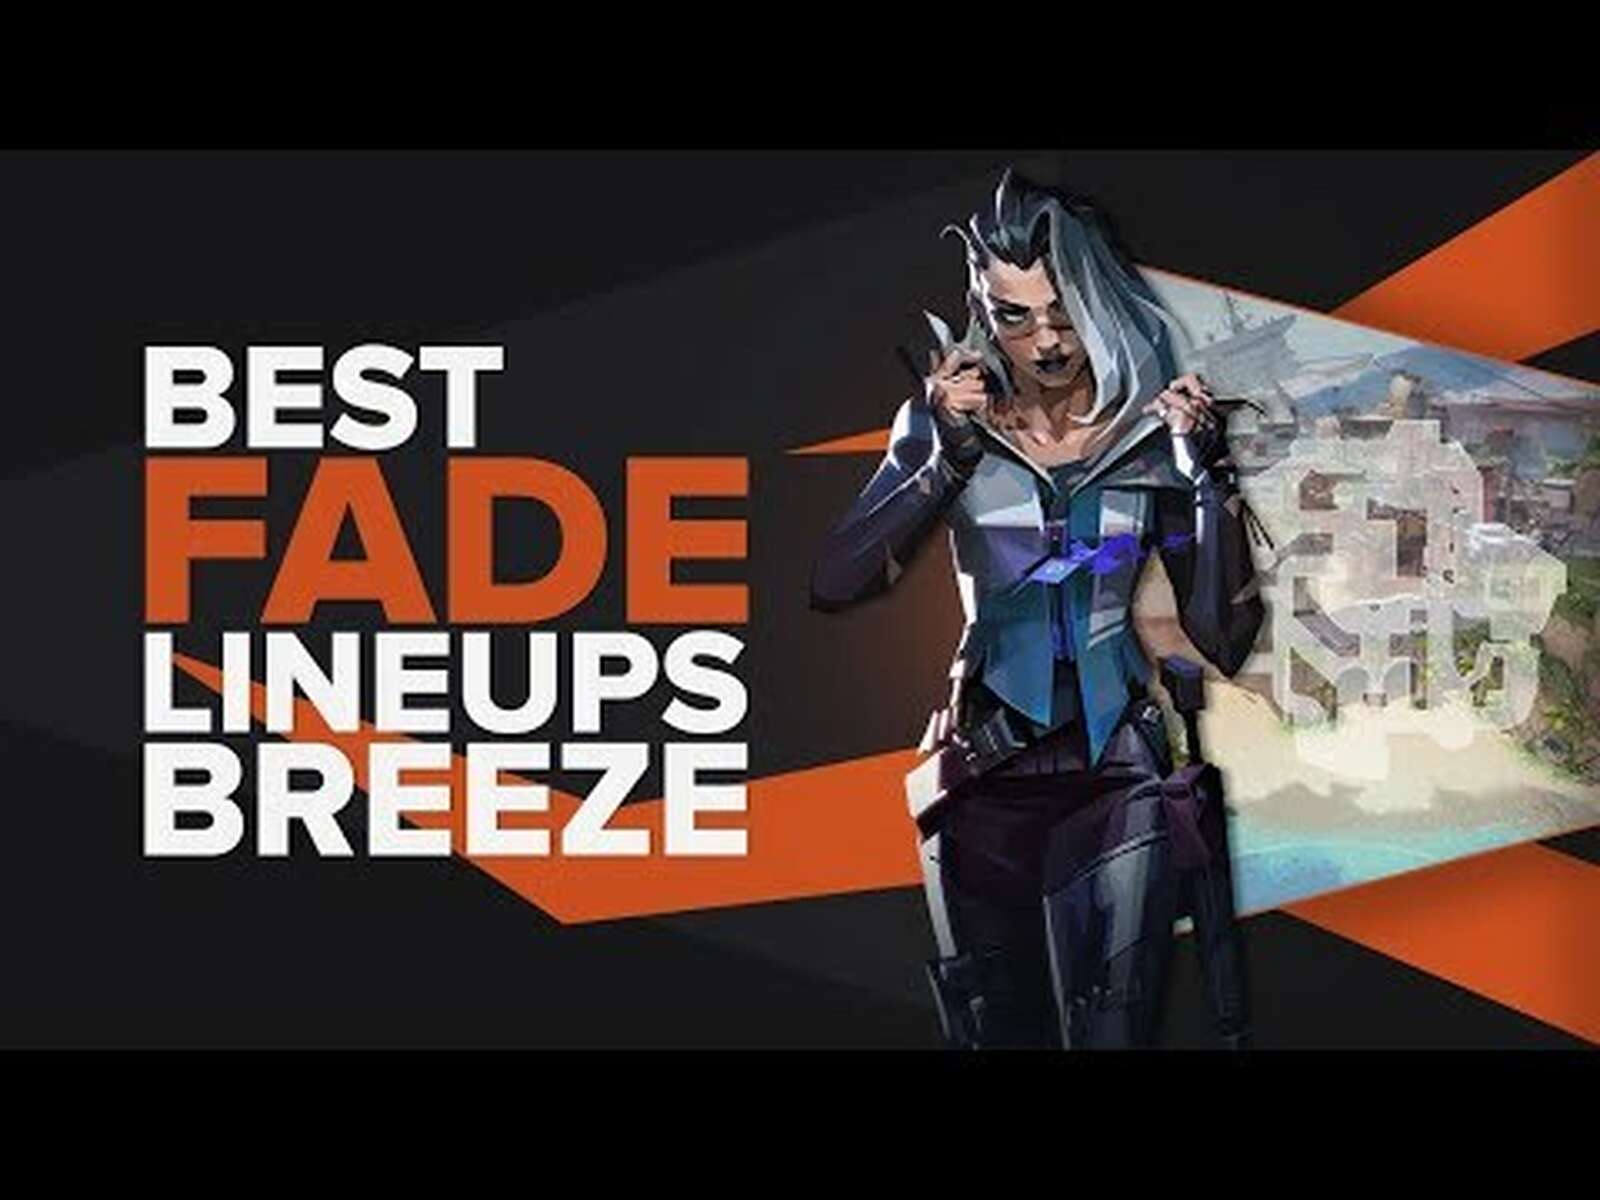 The Best Fade Lineups on Breeze